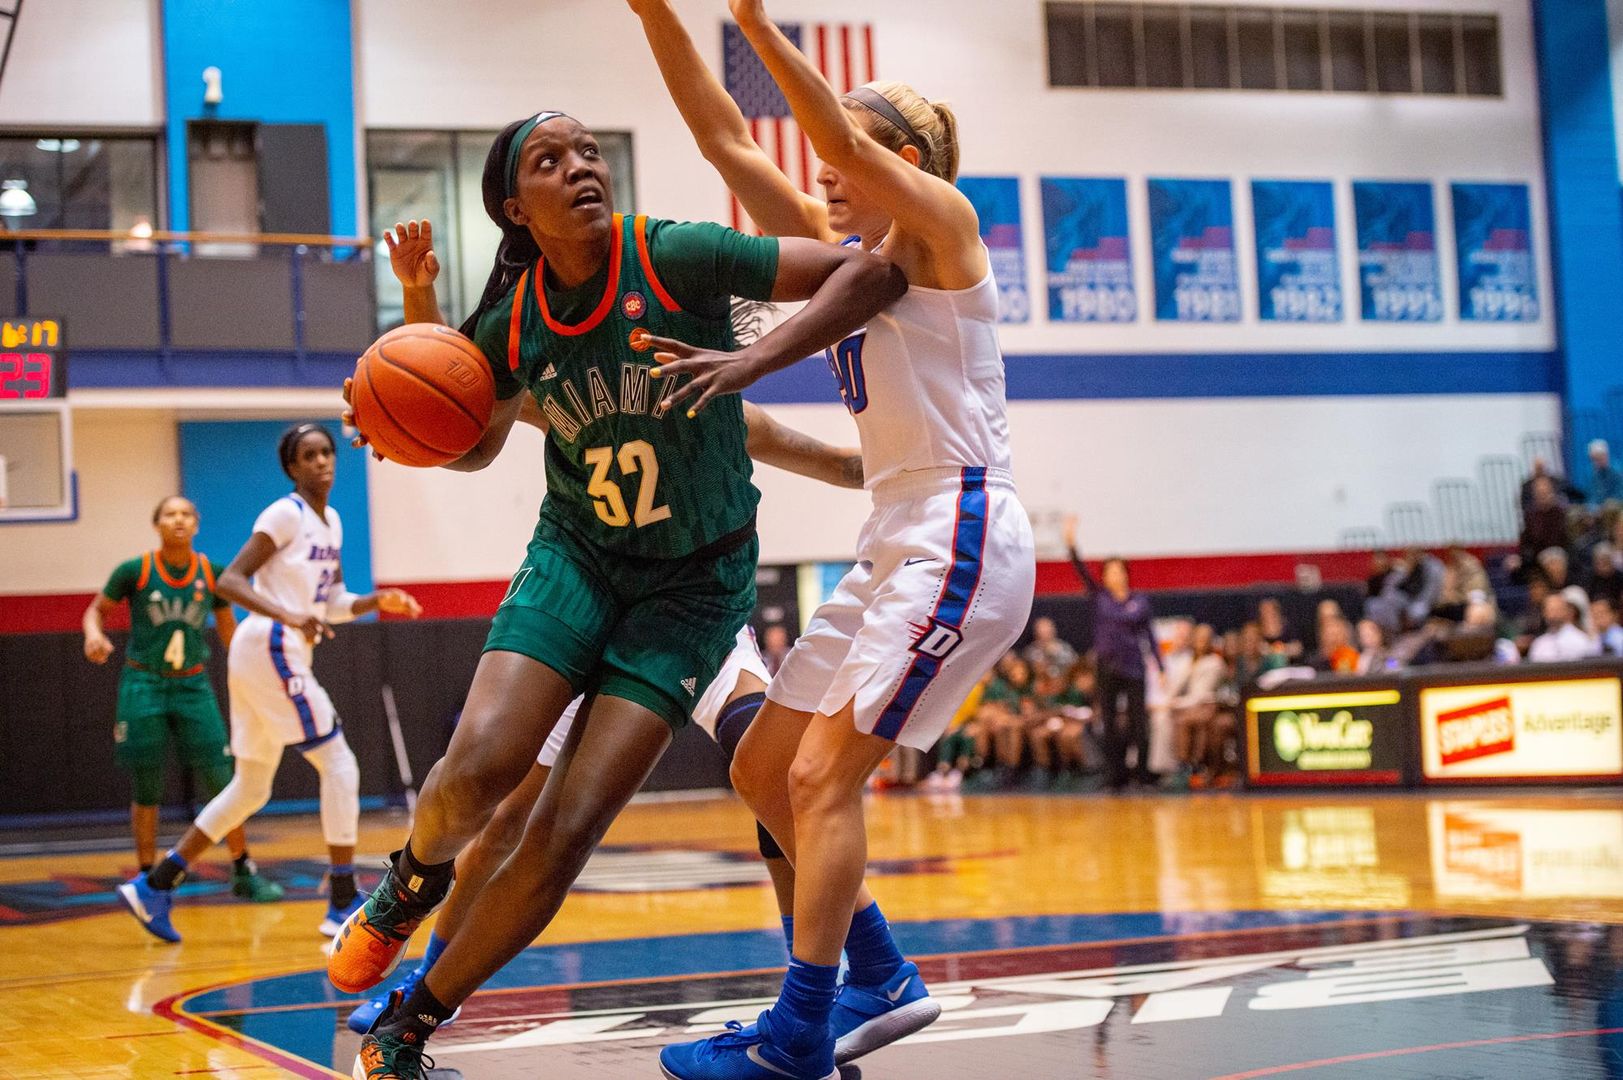 Canes Fall Short to No. 19/20 DePaul in Championship Game